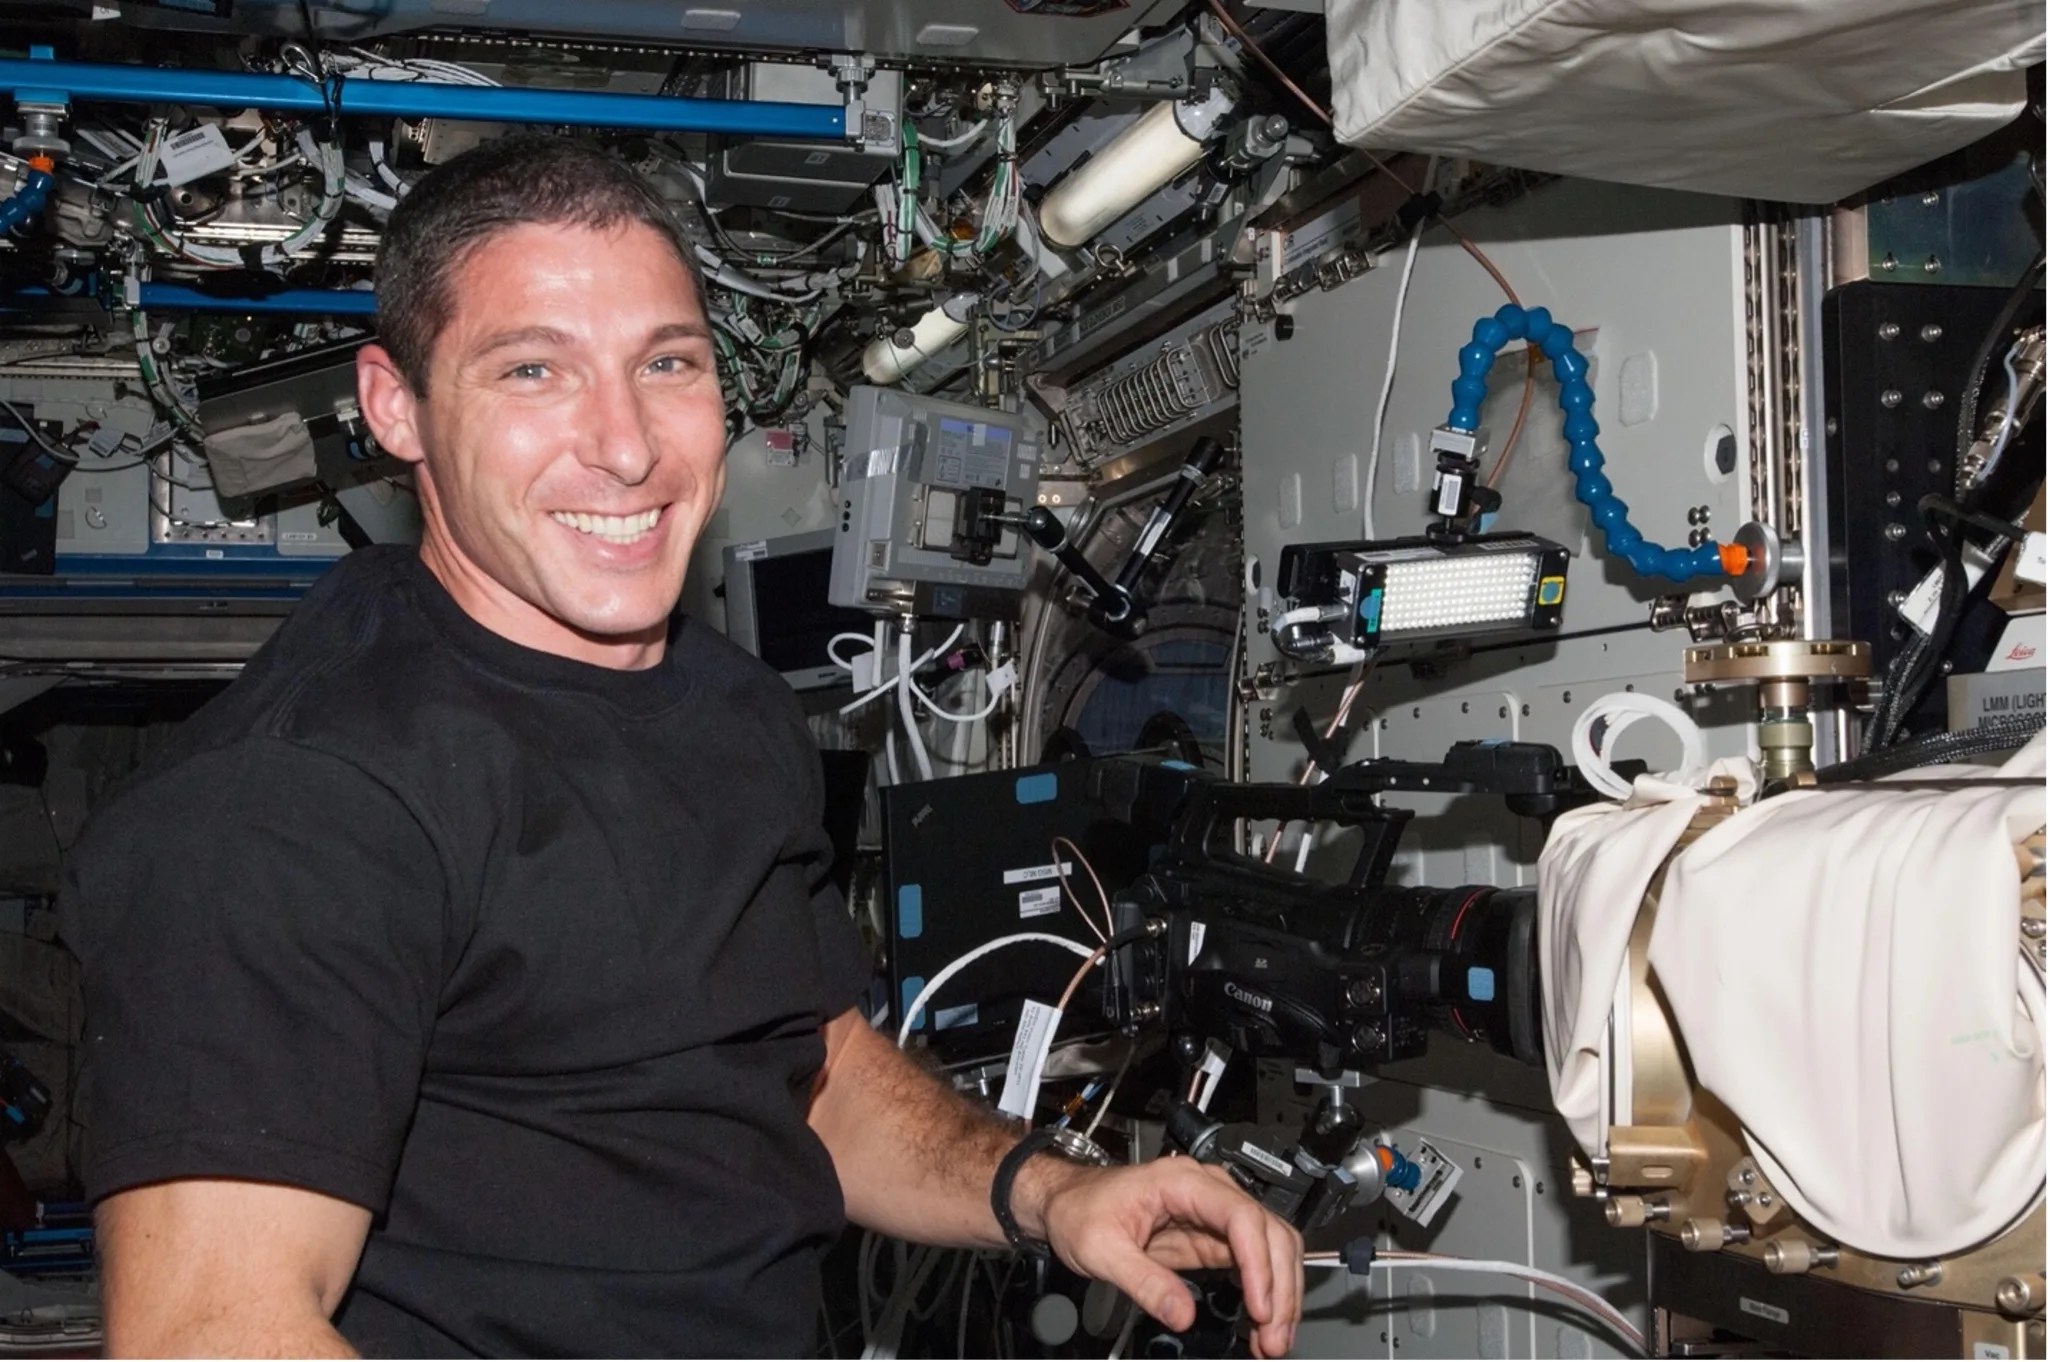 Astronaut within the space station stands next to a large black video camera. Surrounding him are wires and mechanical devices including a gold metallic device closest to him.